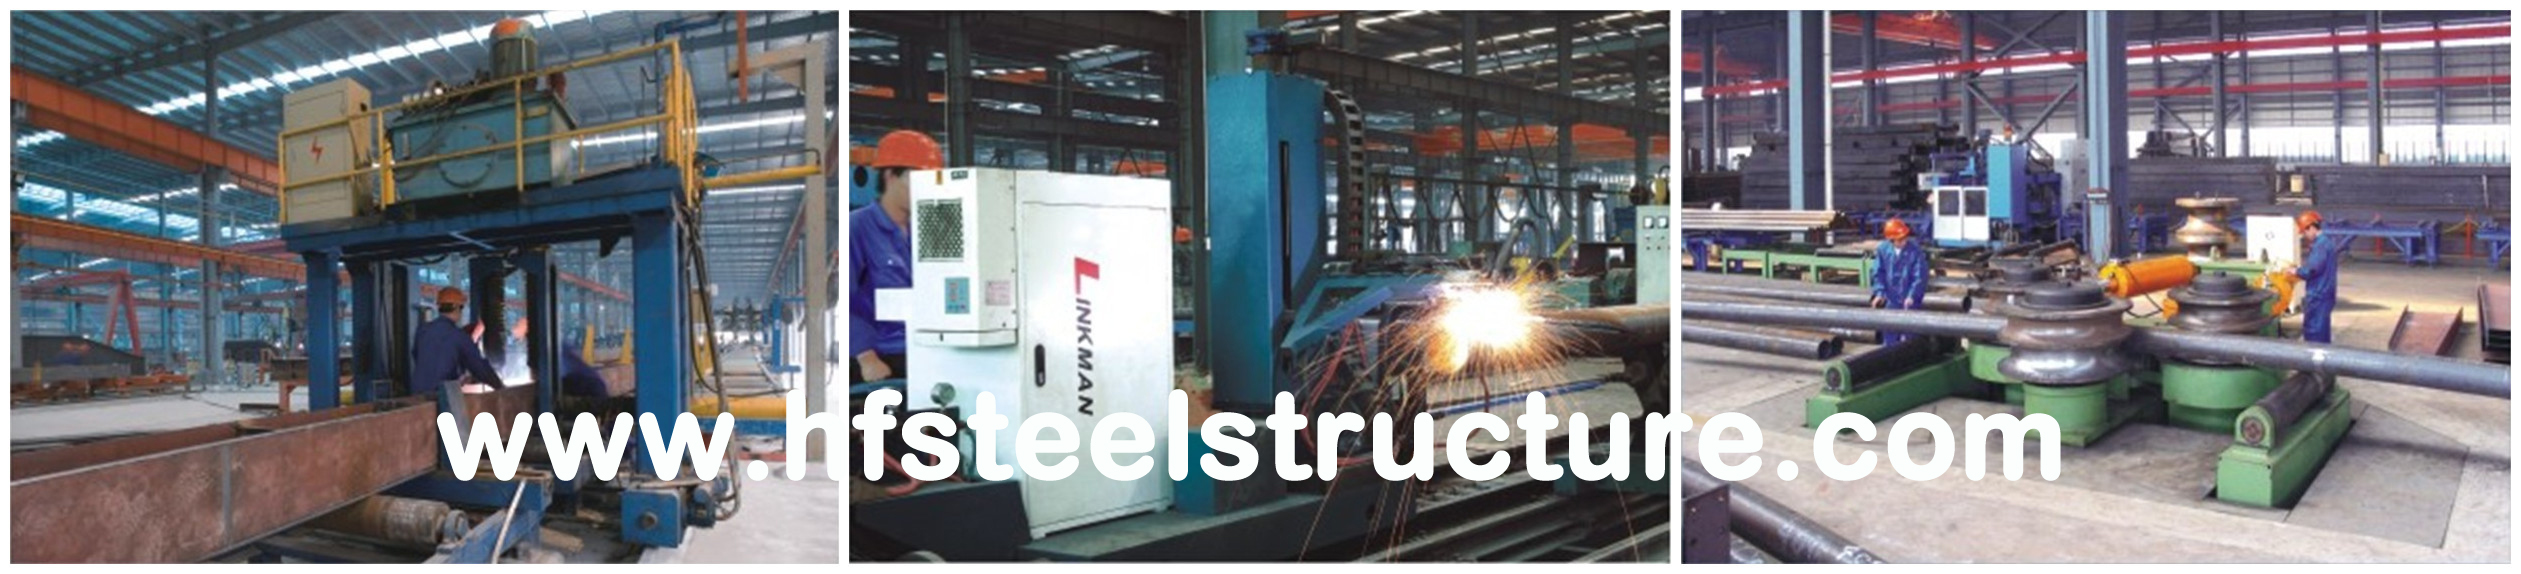 Prefabricated Metal And Traditional /Lightweight Portal Frame Commercial Steel Buildings